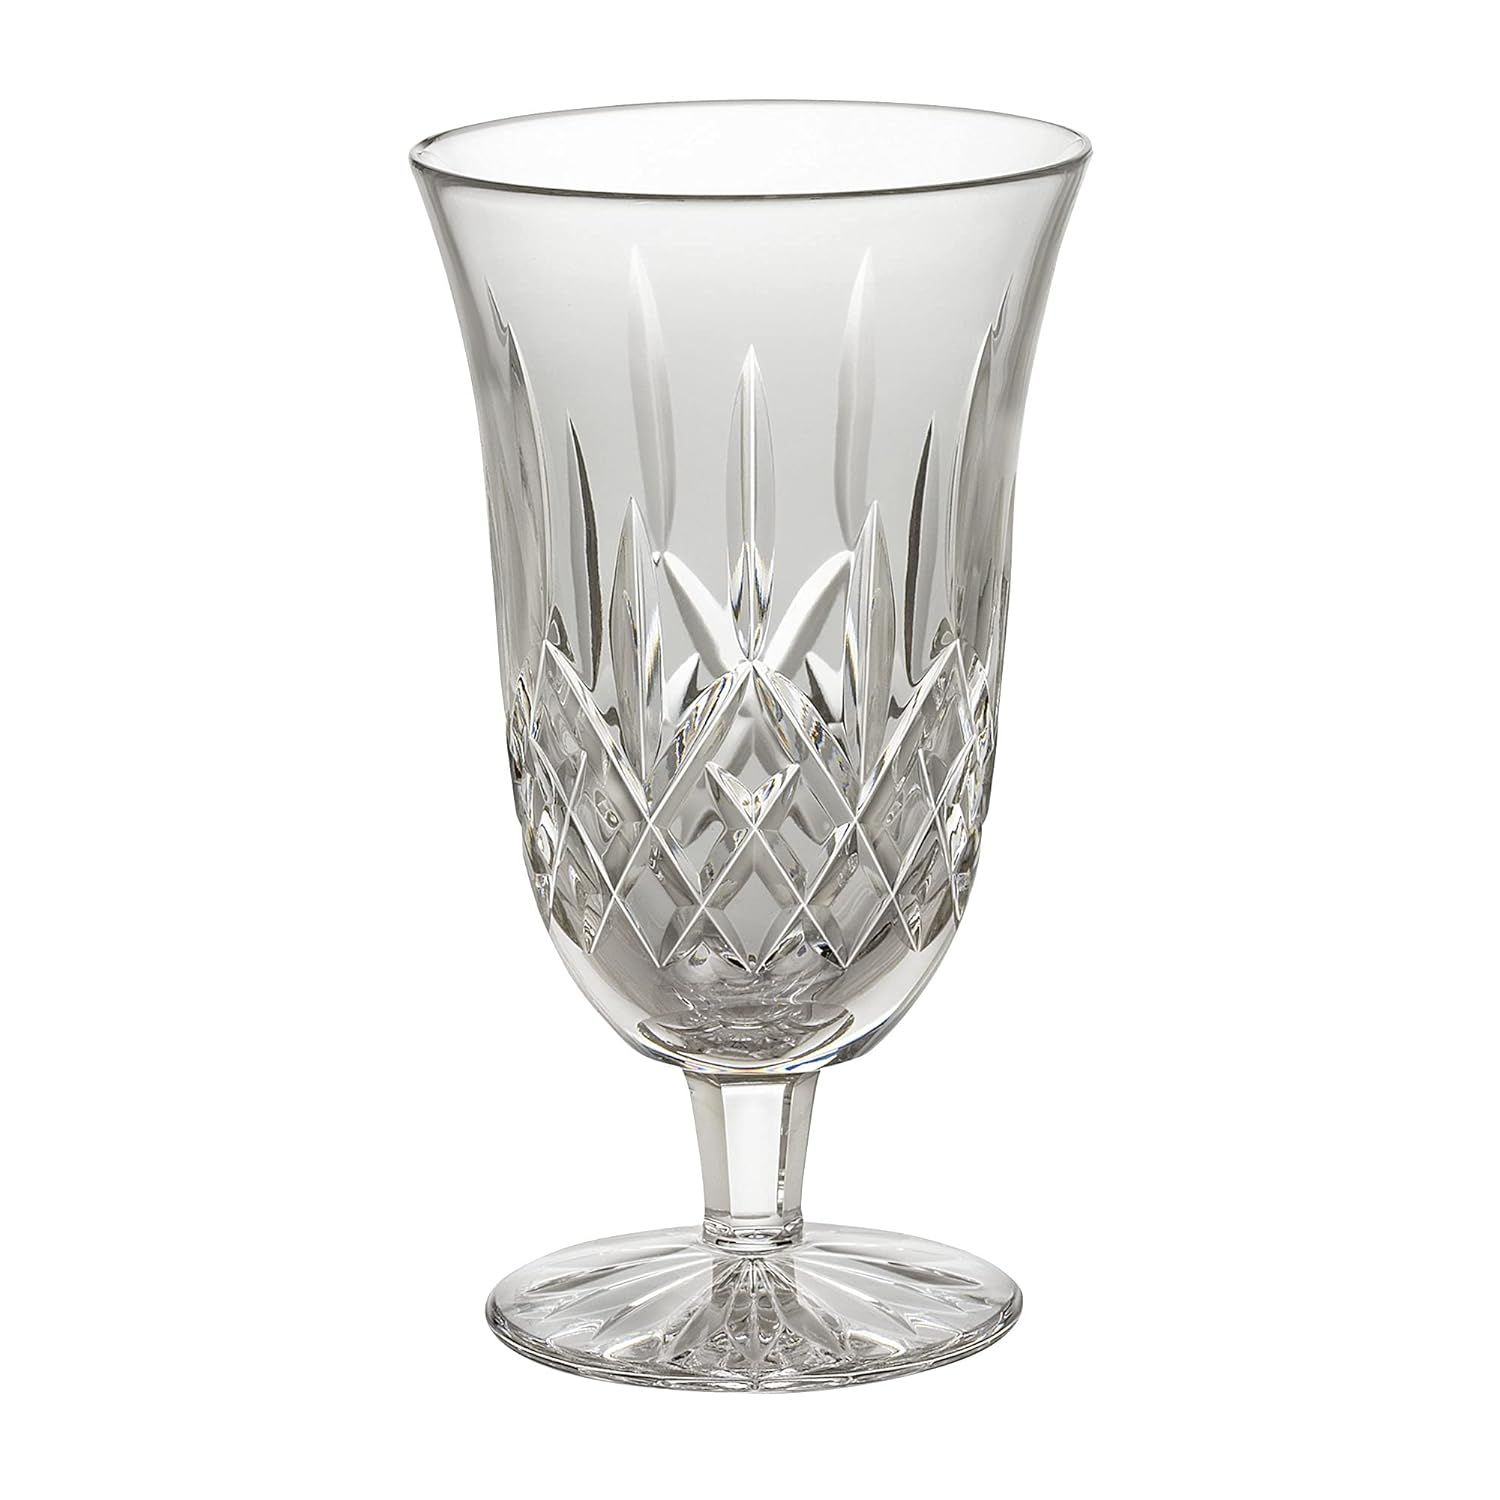 Lismore Traditional Clear Cut-Crystal Goblet Glass for Entertaining